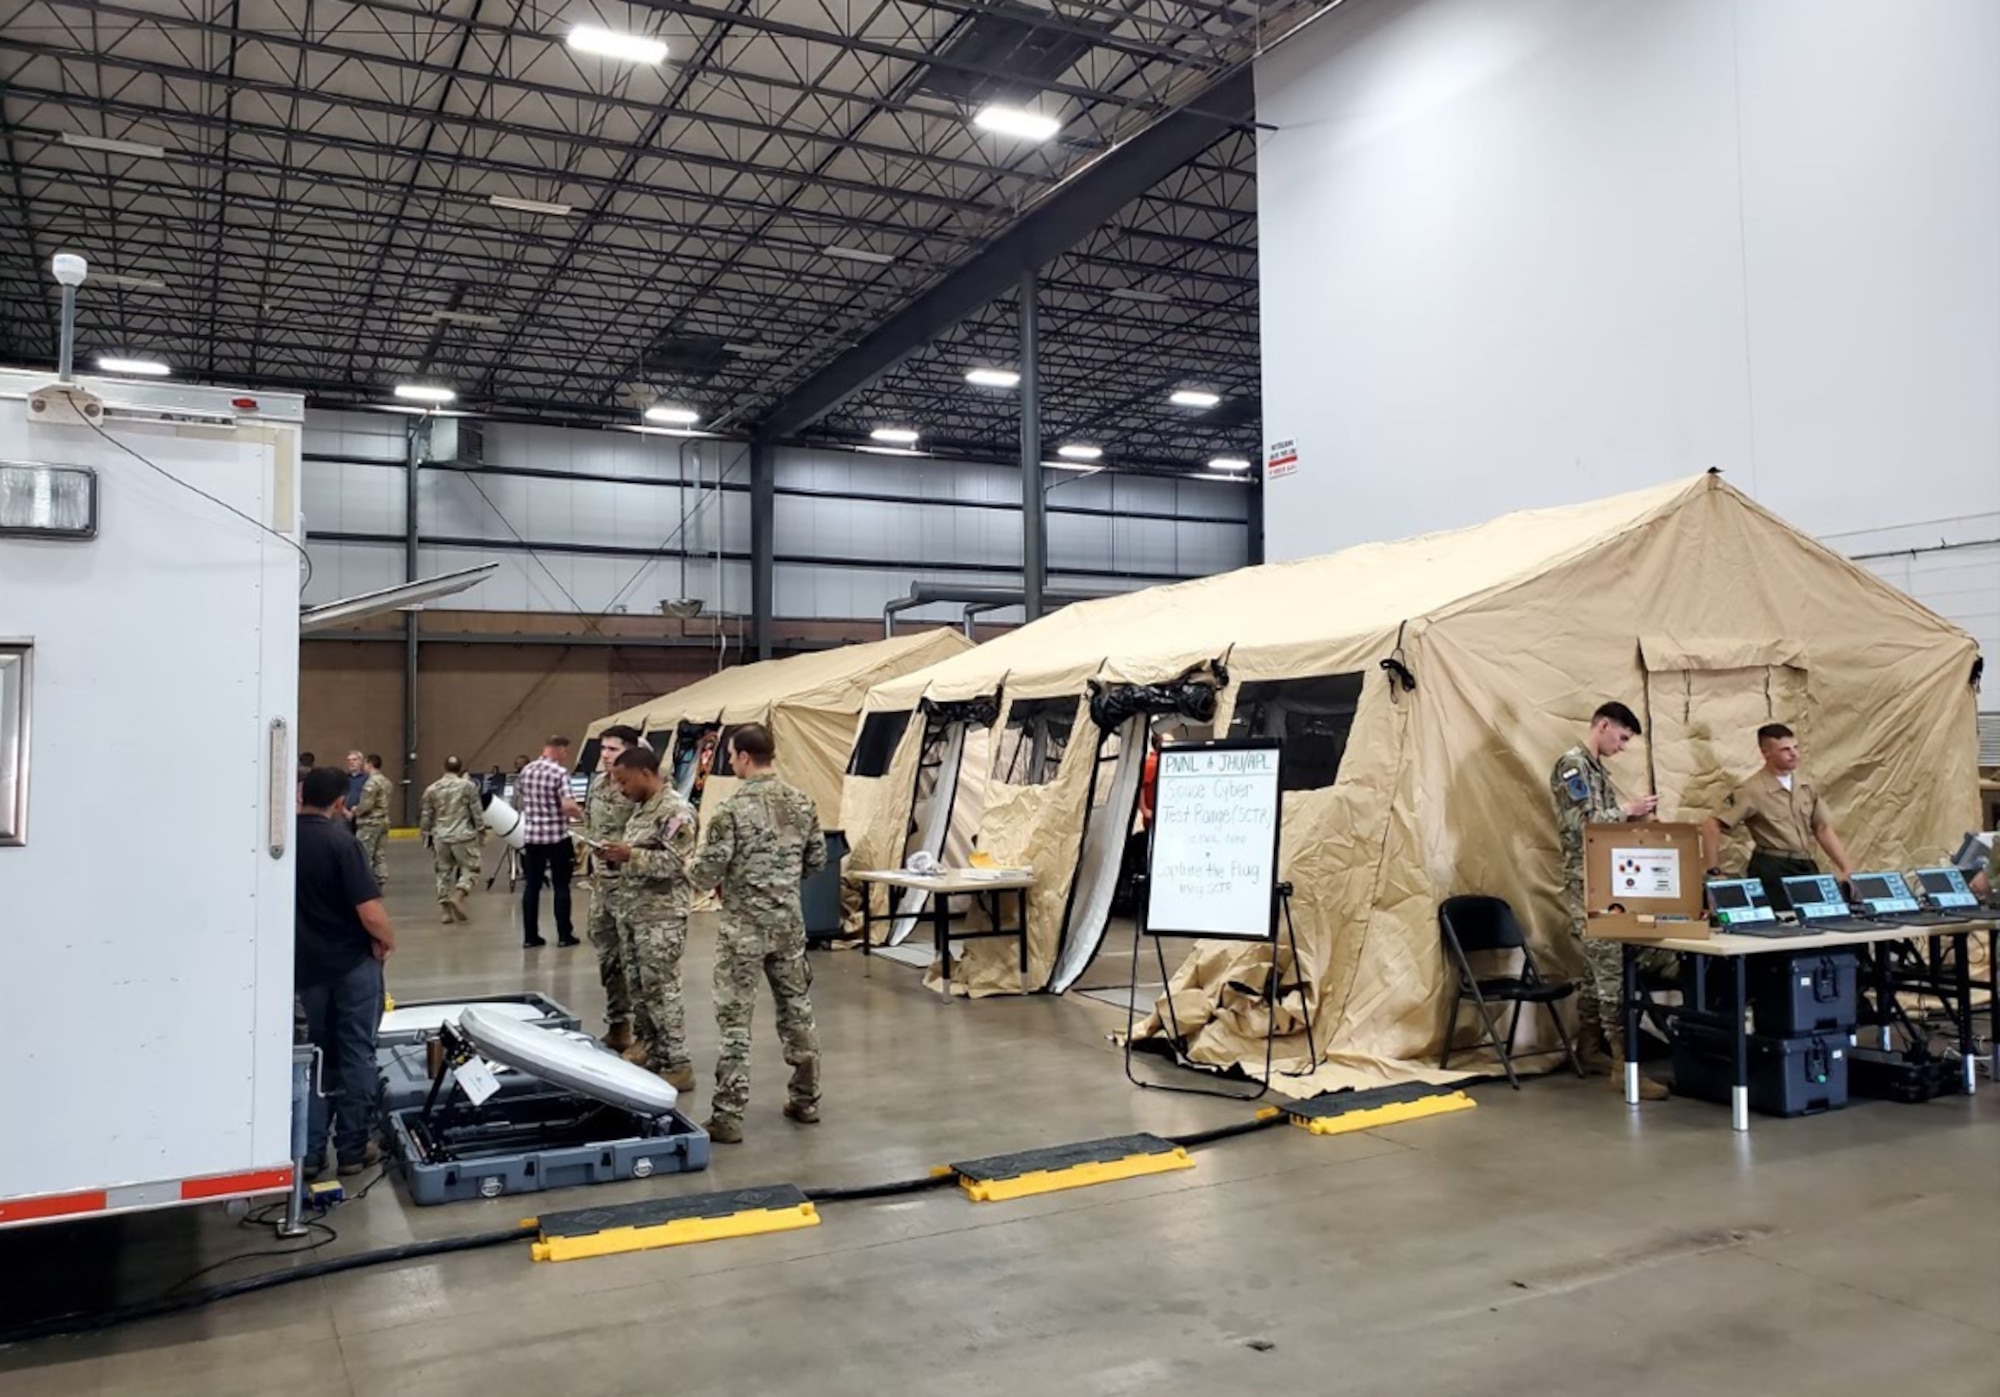 Space Delta 11, the U.S. Space Force’s Range and Aggressor Delta, hosted its inaugural National Space Test and Training Complex (NSTTC) User's Conference from June 5-9, 2023, in Colorado Springs, Colorado.